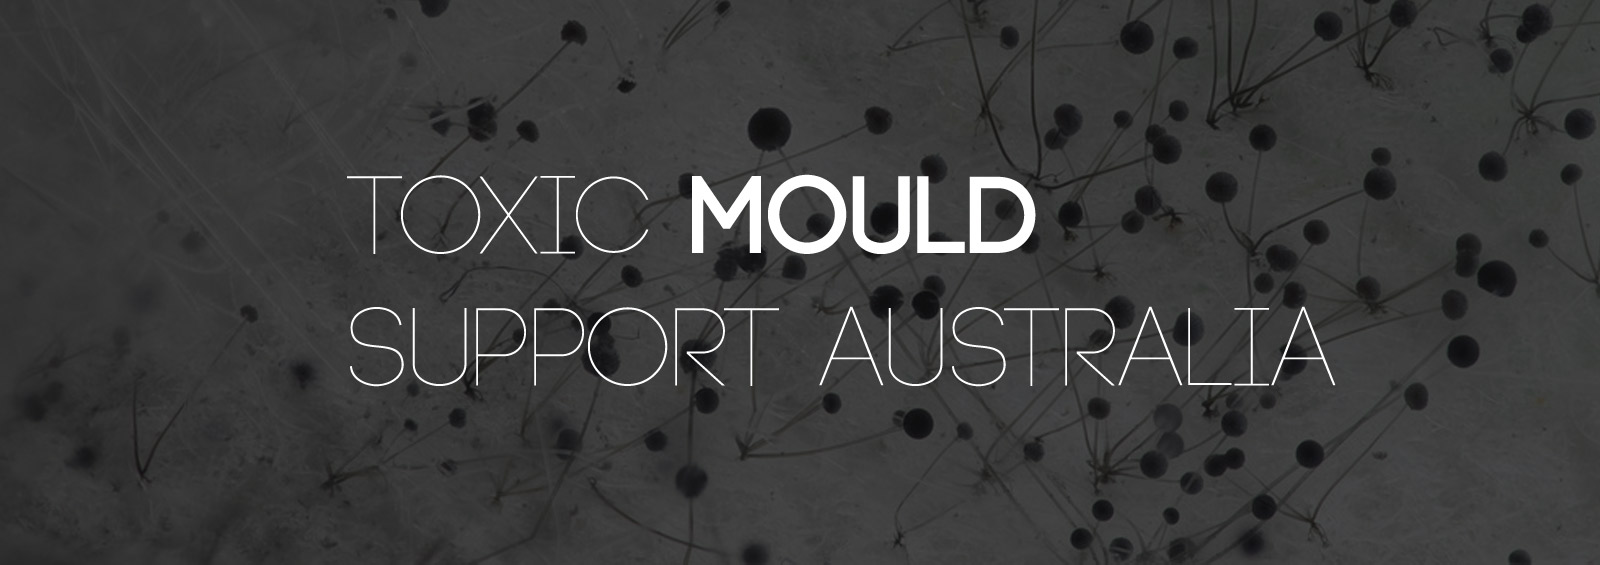 Toxic Mould Support Australia